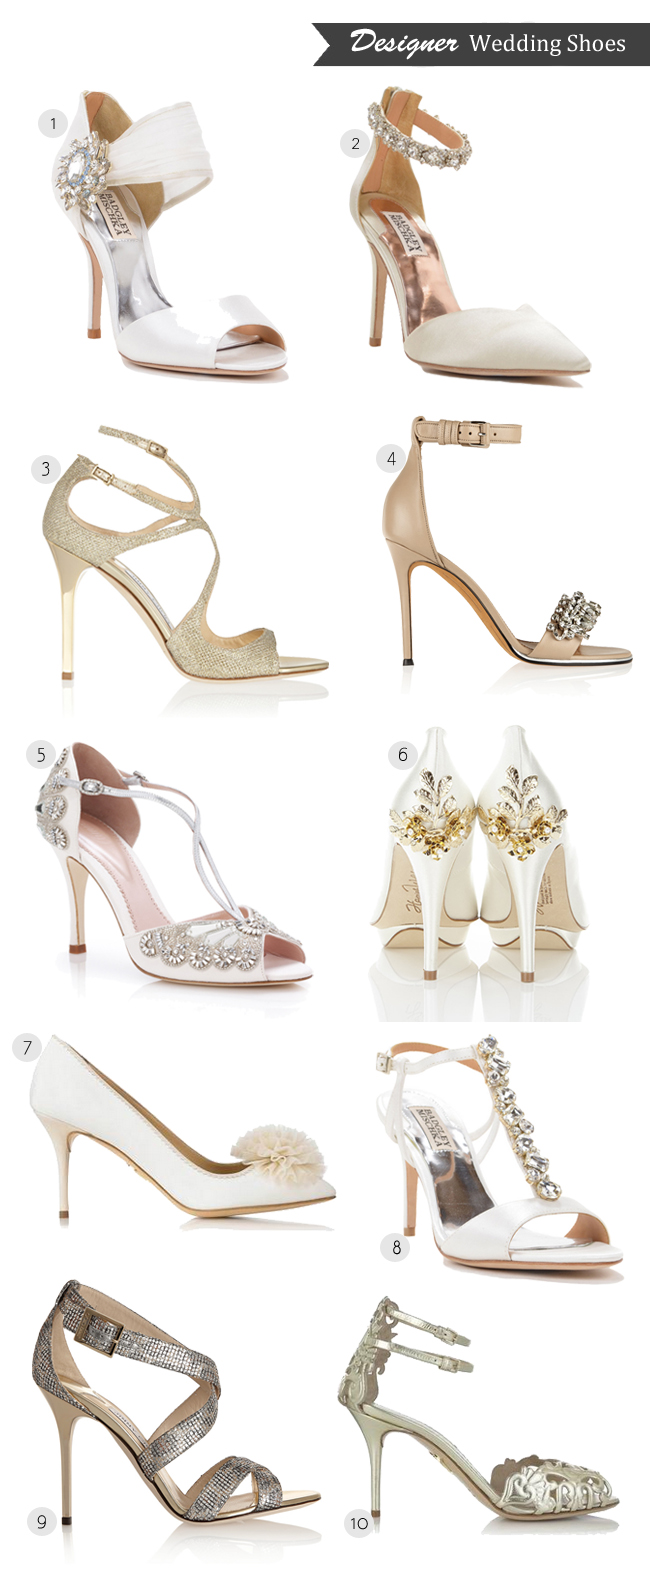 givenchy wedding shoes